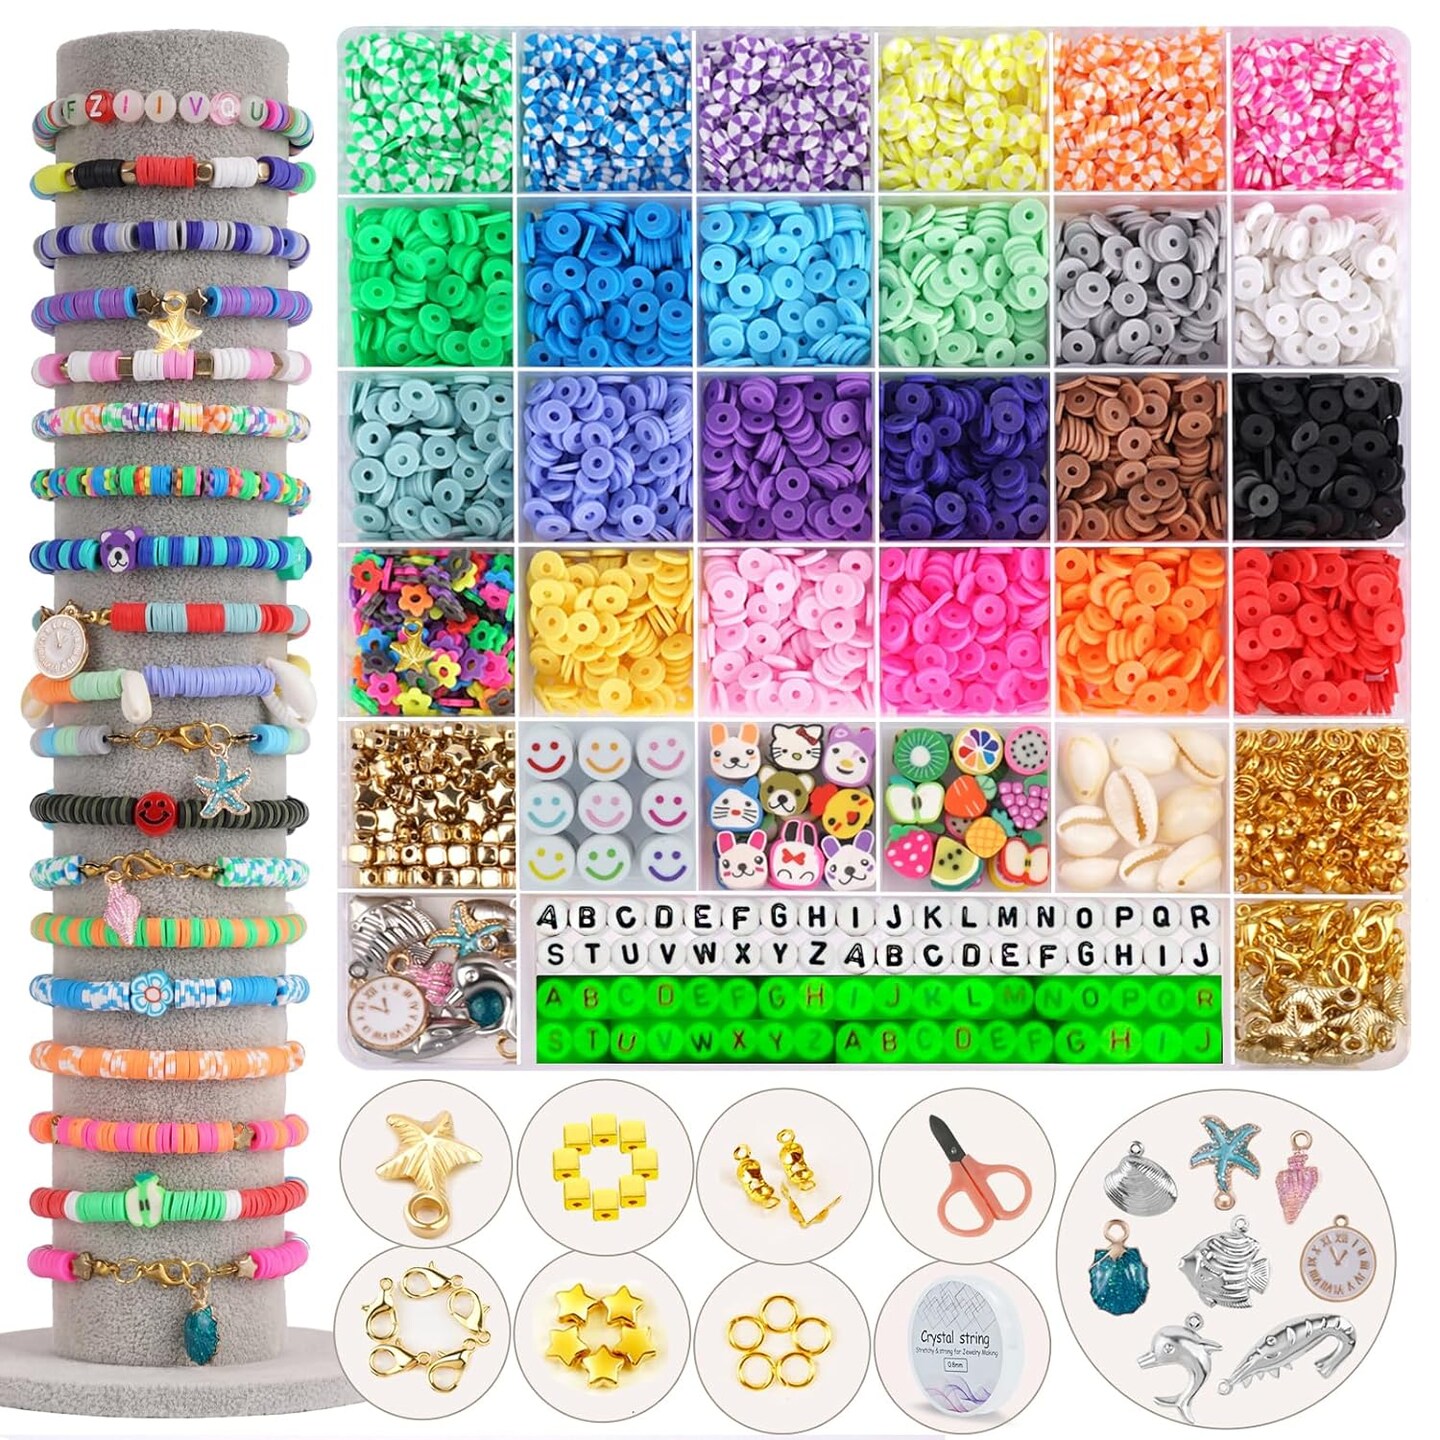 6100Pcs Clay Beads Bracelet Making Kit For Girls 24 Colors Friendship Bracelet Beads Kit With Letter Beads Polymer Heishi Bead For Jewelry Making